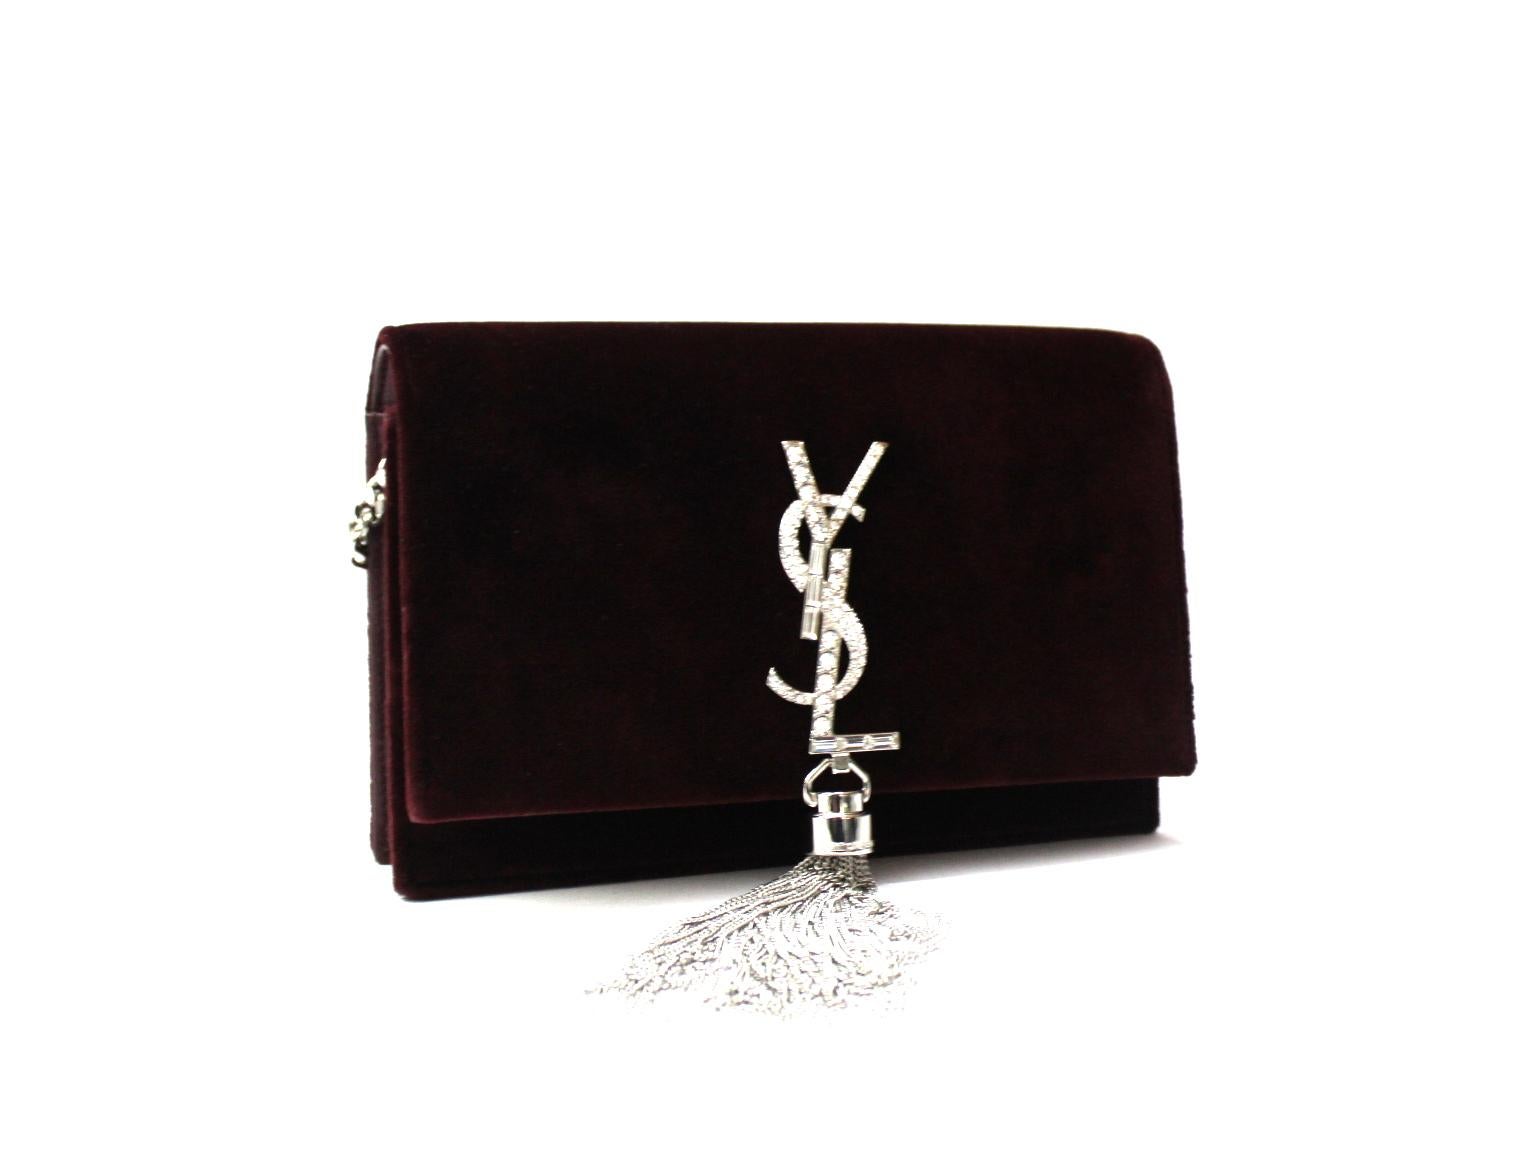 Saint Laurent Kate model bag with tassel, made of burgundy velvet with silver hardware and crystals.
Magnetic flap closure, internally roomy for the essentials.
The bag is equipped with a removable chain shoulder strap.
It is in like new condition.